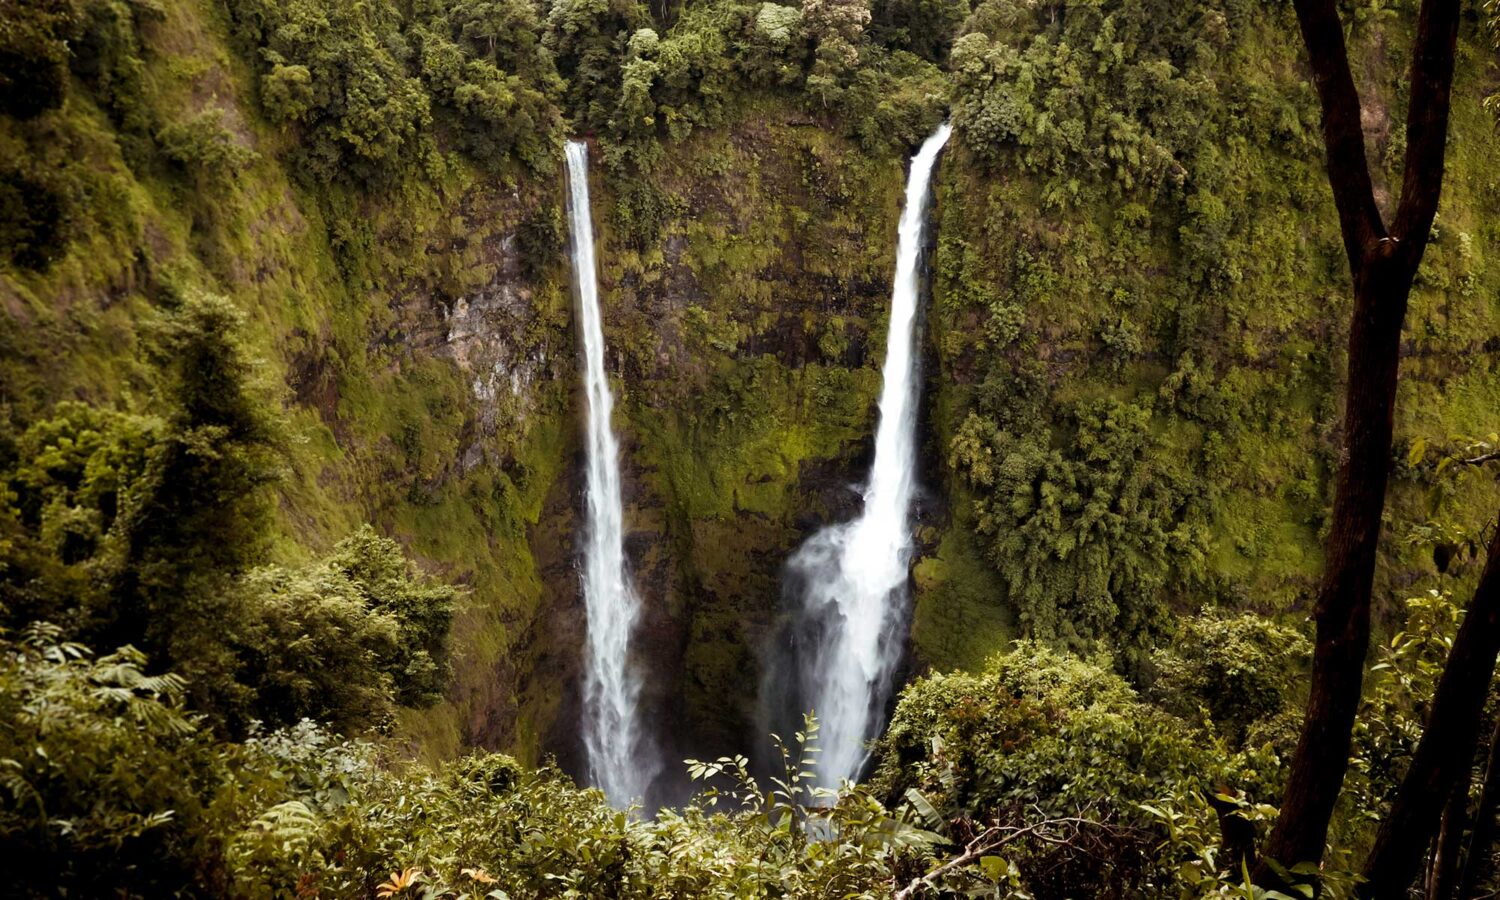 The double streams of Tad Fane Waterfall, the highest waterfalls of Laos on this Bolaven Plateau itinerary